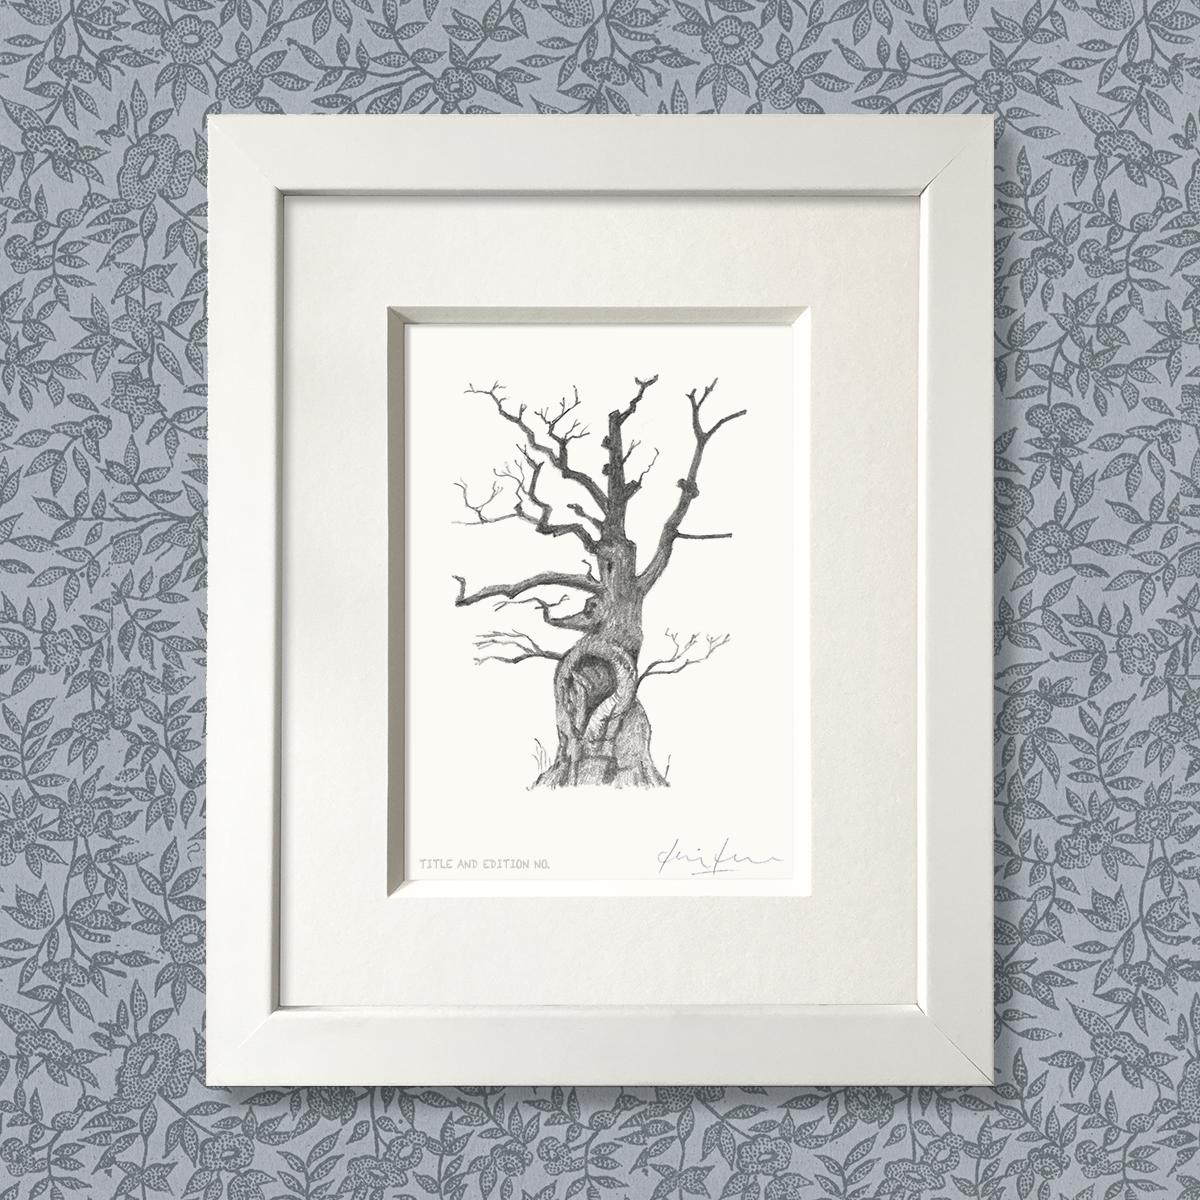 Limited edition print from pencil sketch of a tree in a white frame